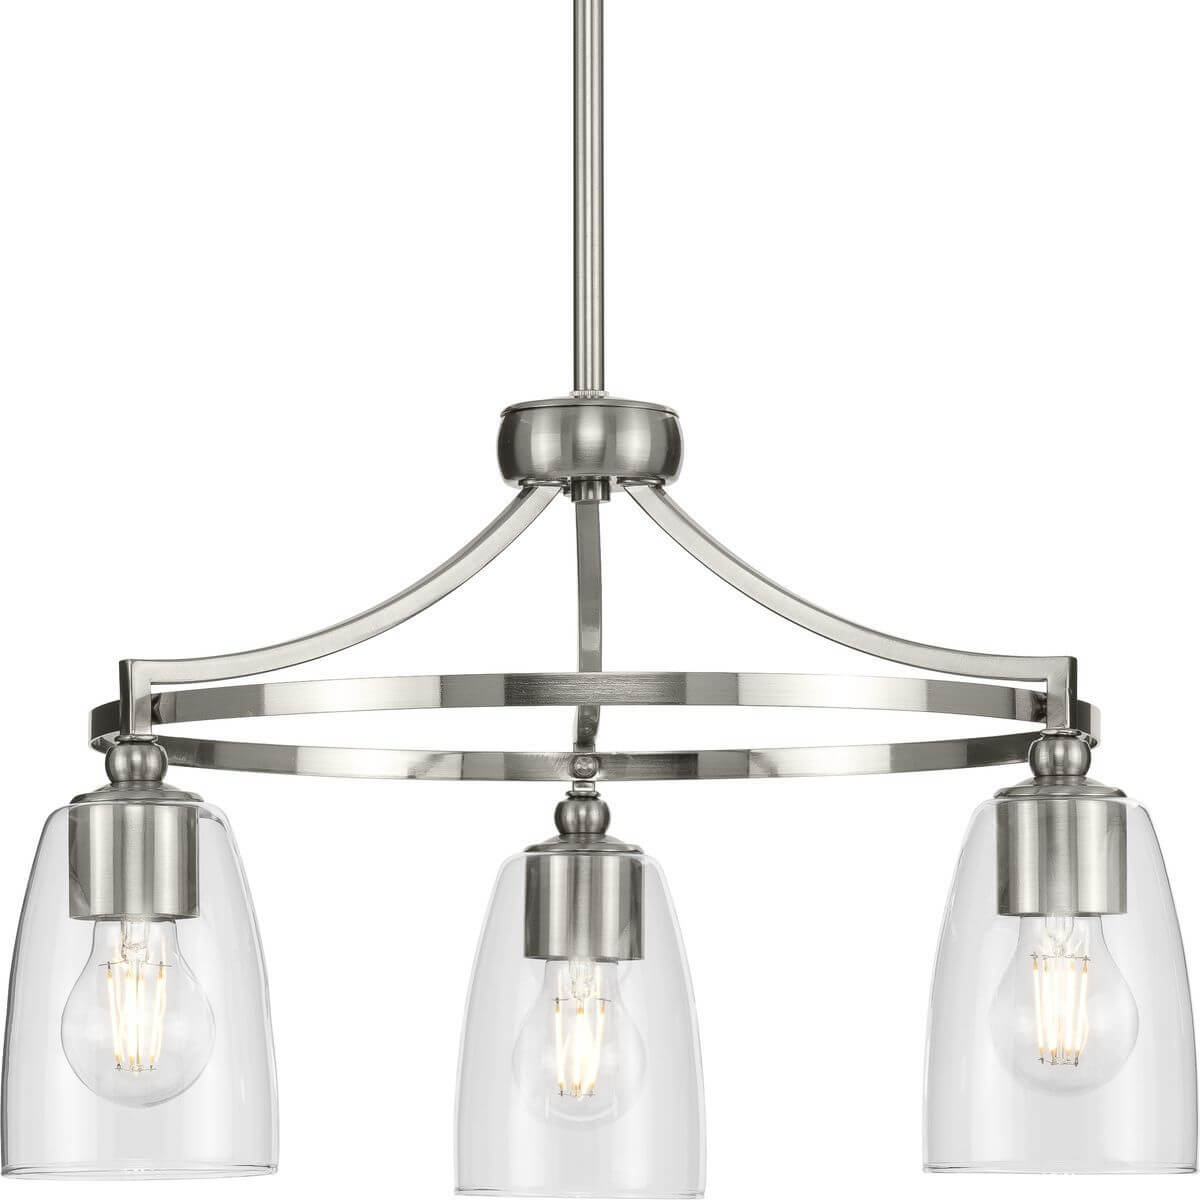 Progress Lighting Parkhurst 3 Light 21 inch Chandelier in Brushed Nickel with Clear Glass P400295-009